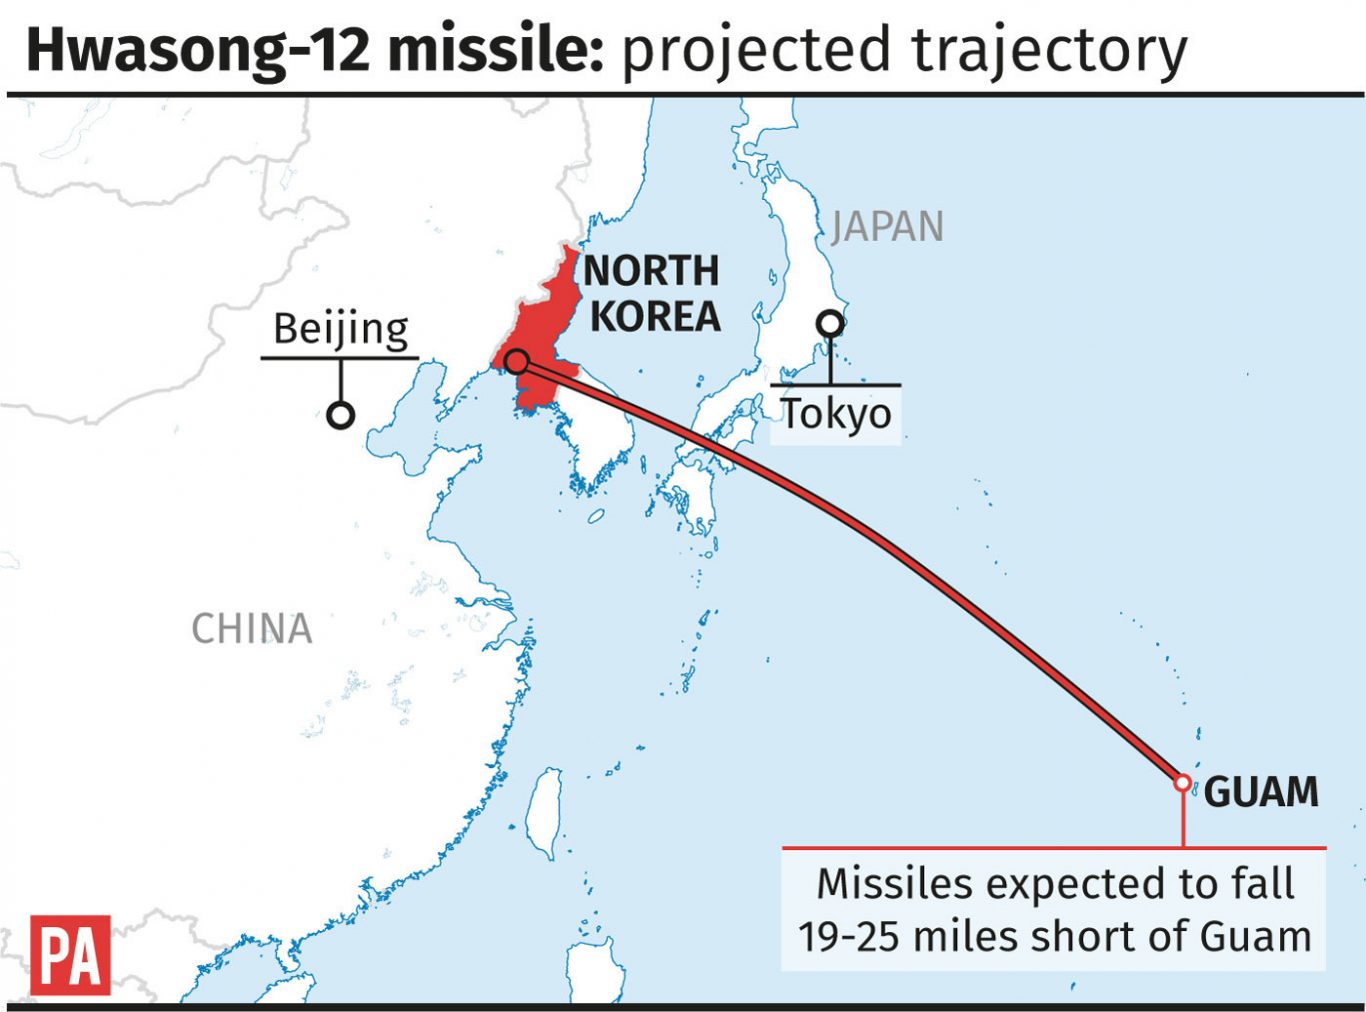 Hwasong-12 missile: projected trajectory